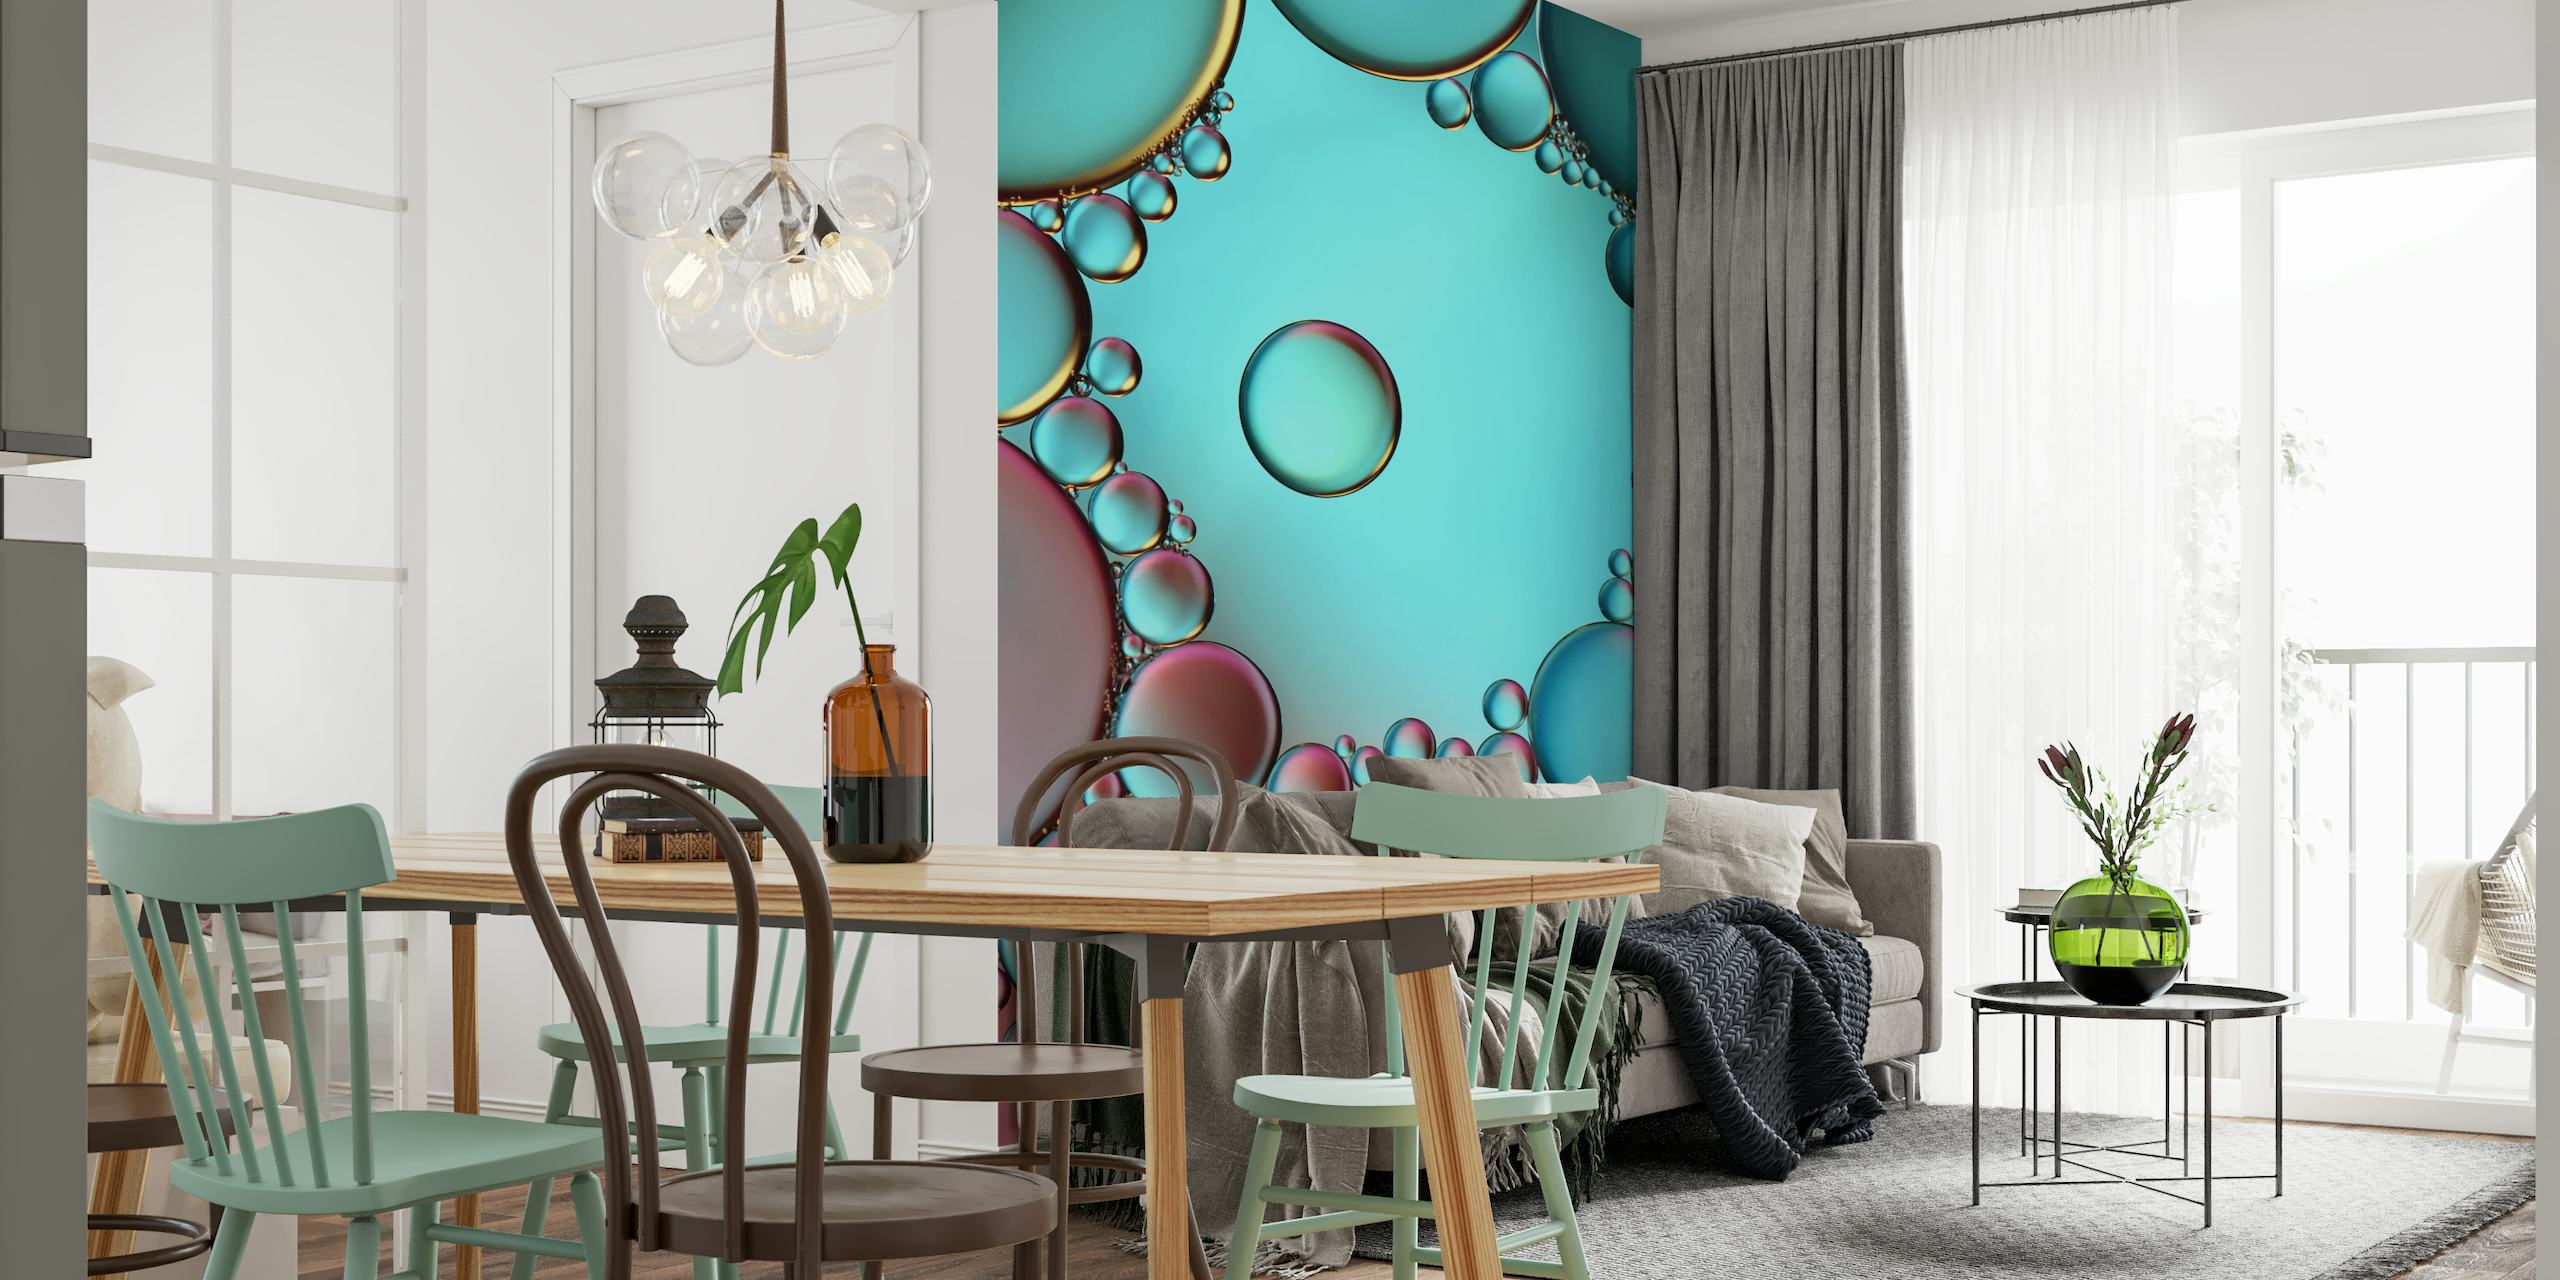 Artistic wall mural featuring multicolored bubbles on a teal background symbolizing protection and enclosure